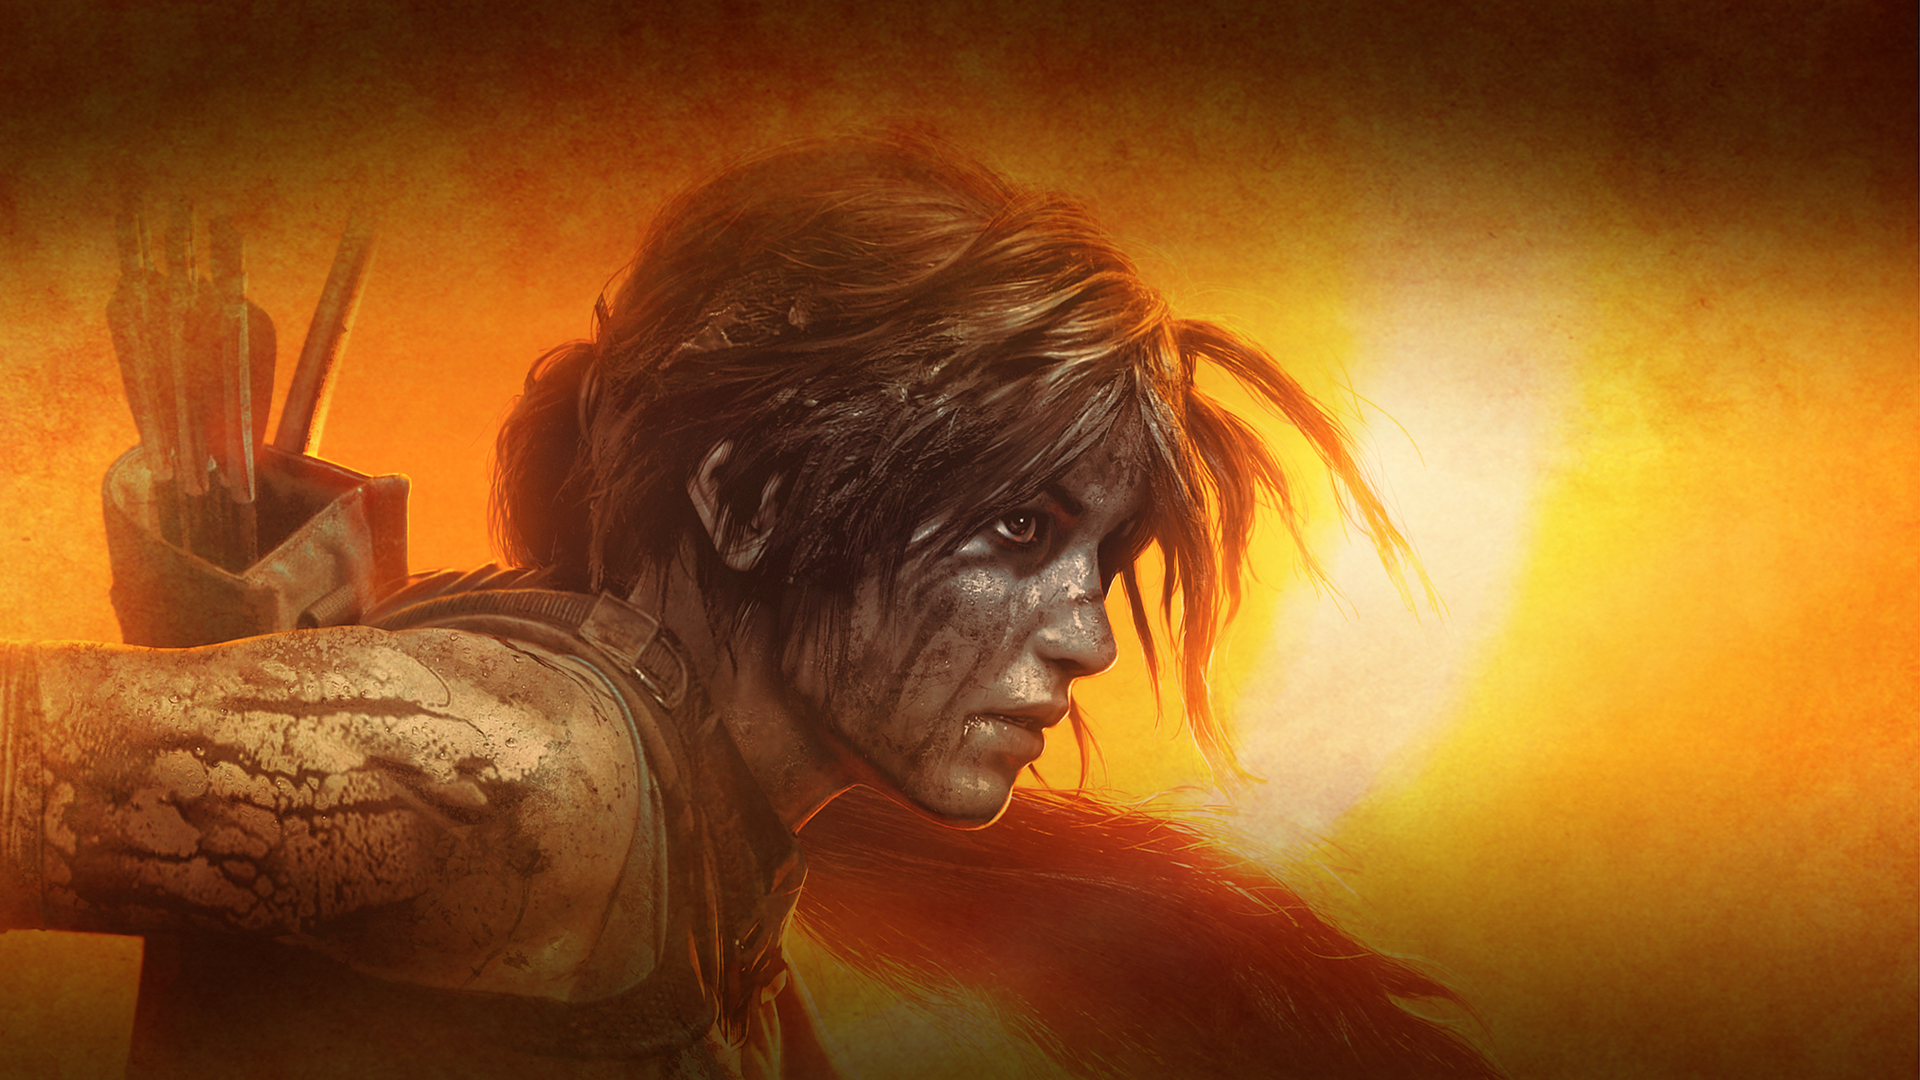 Lara Croft in Shadow of the Tomb Raider Wallpapers